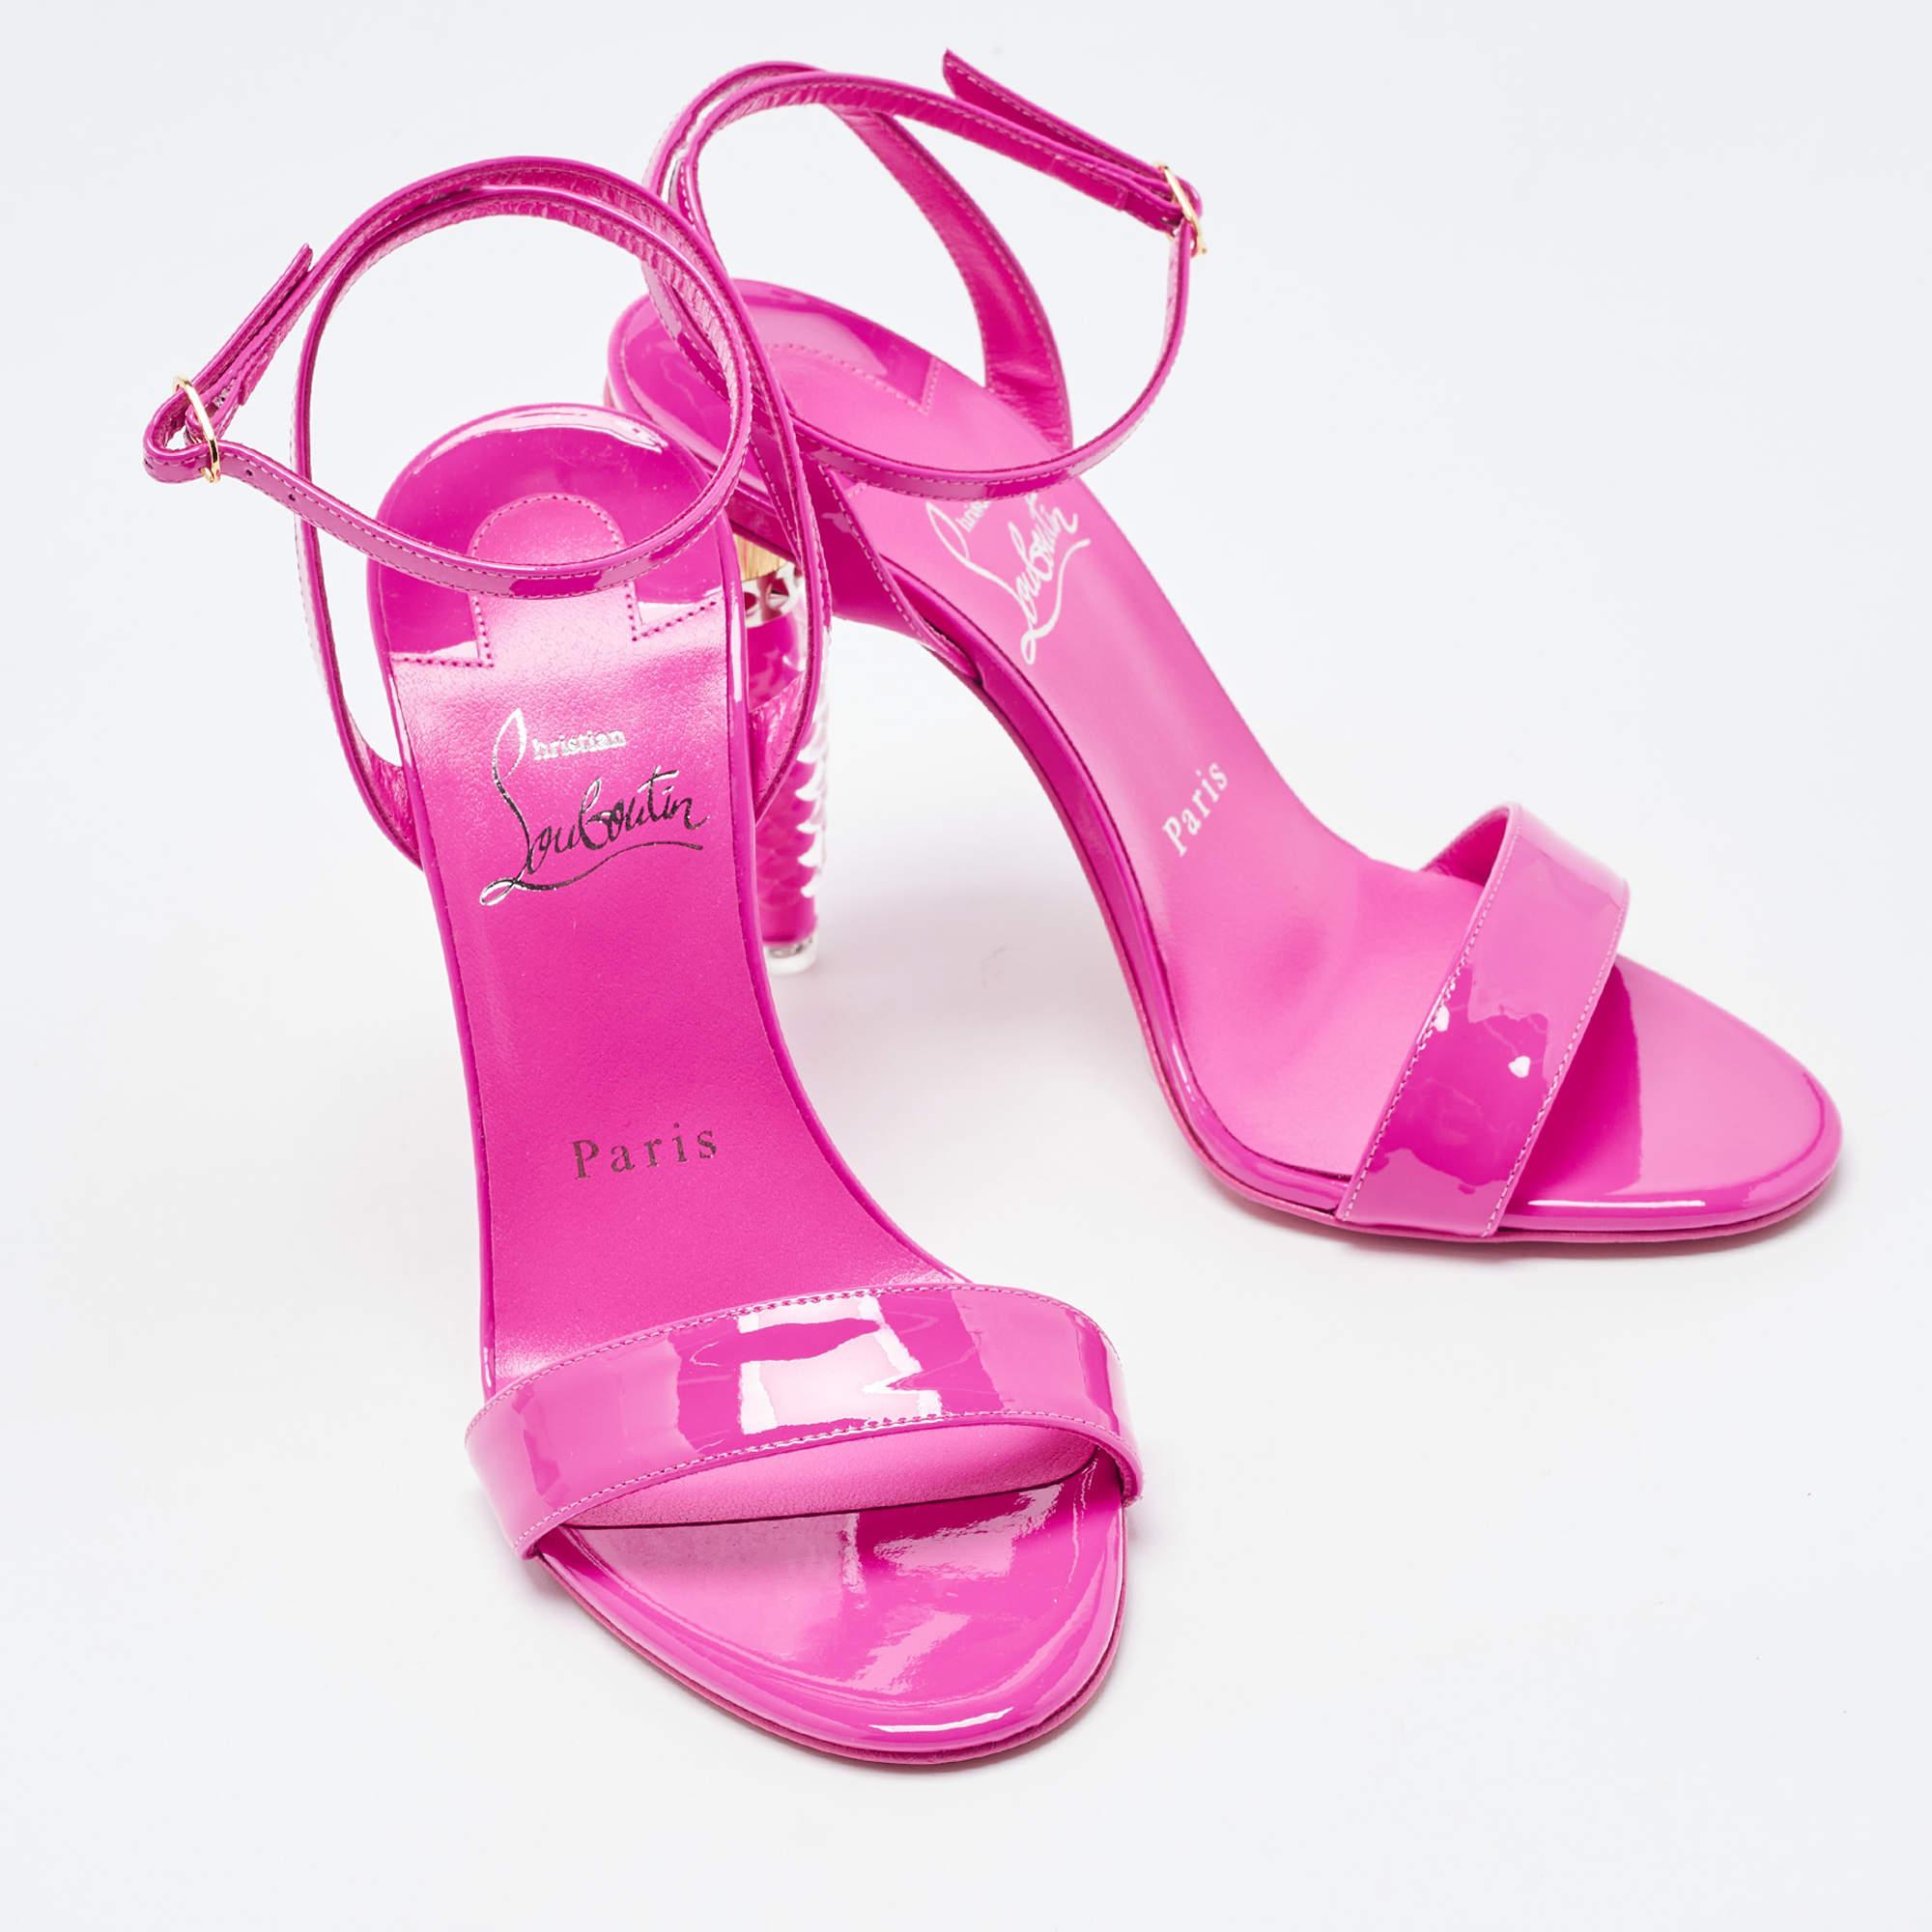 Christian Louboutin Fuchsia Lipgloss Queen Ankle Strap Sandals Size 36 2